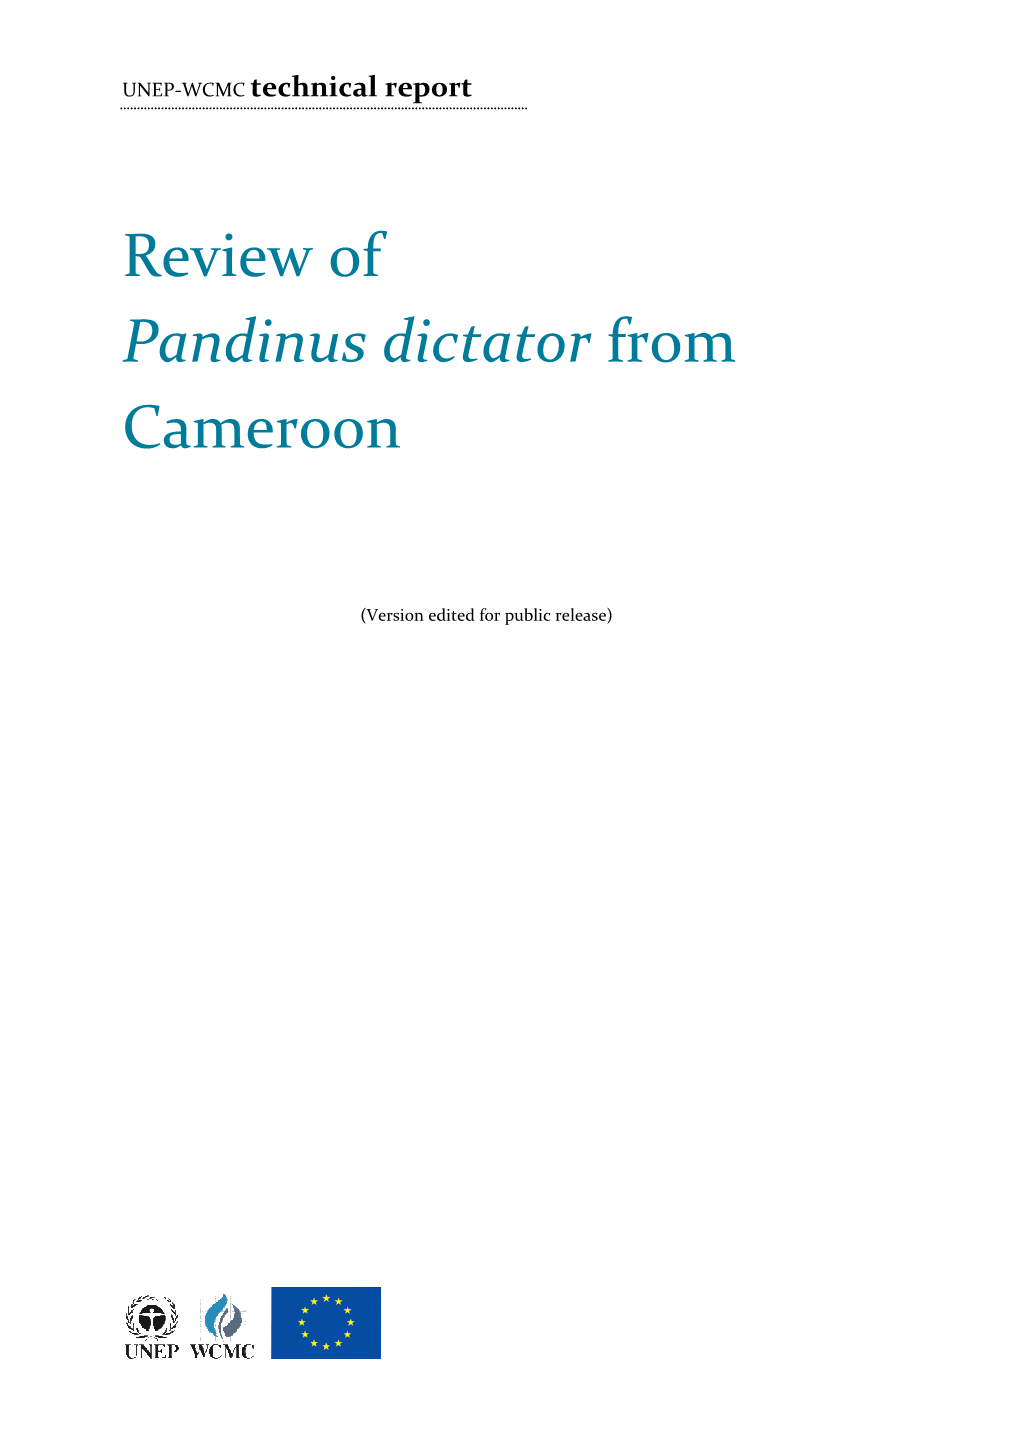 Review of Pandinus Dictator from Cameroon